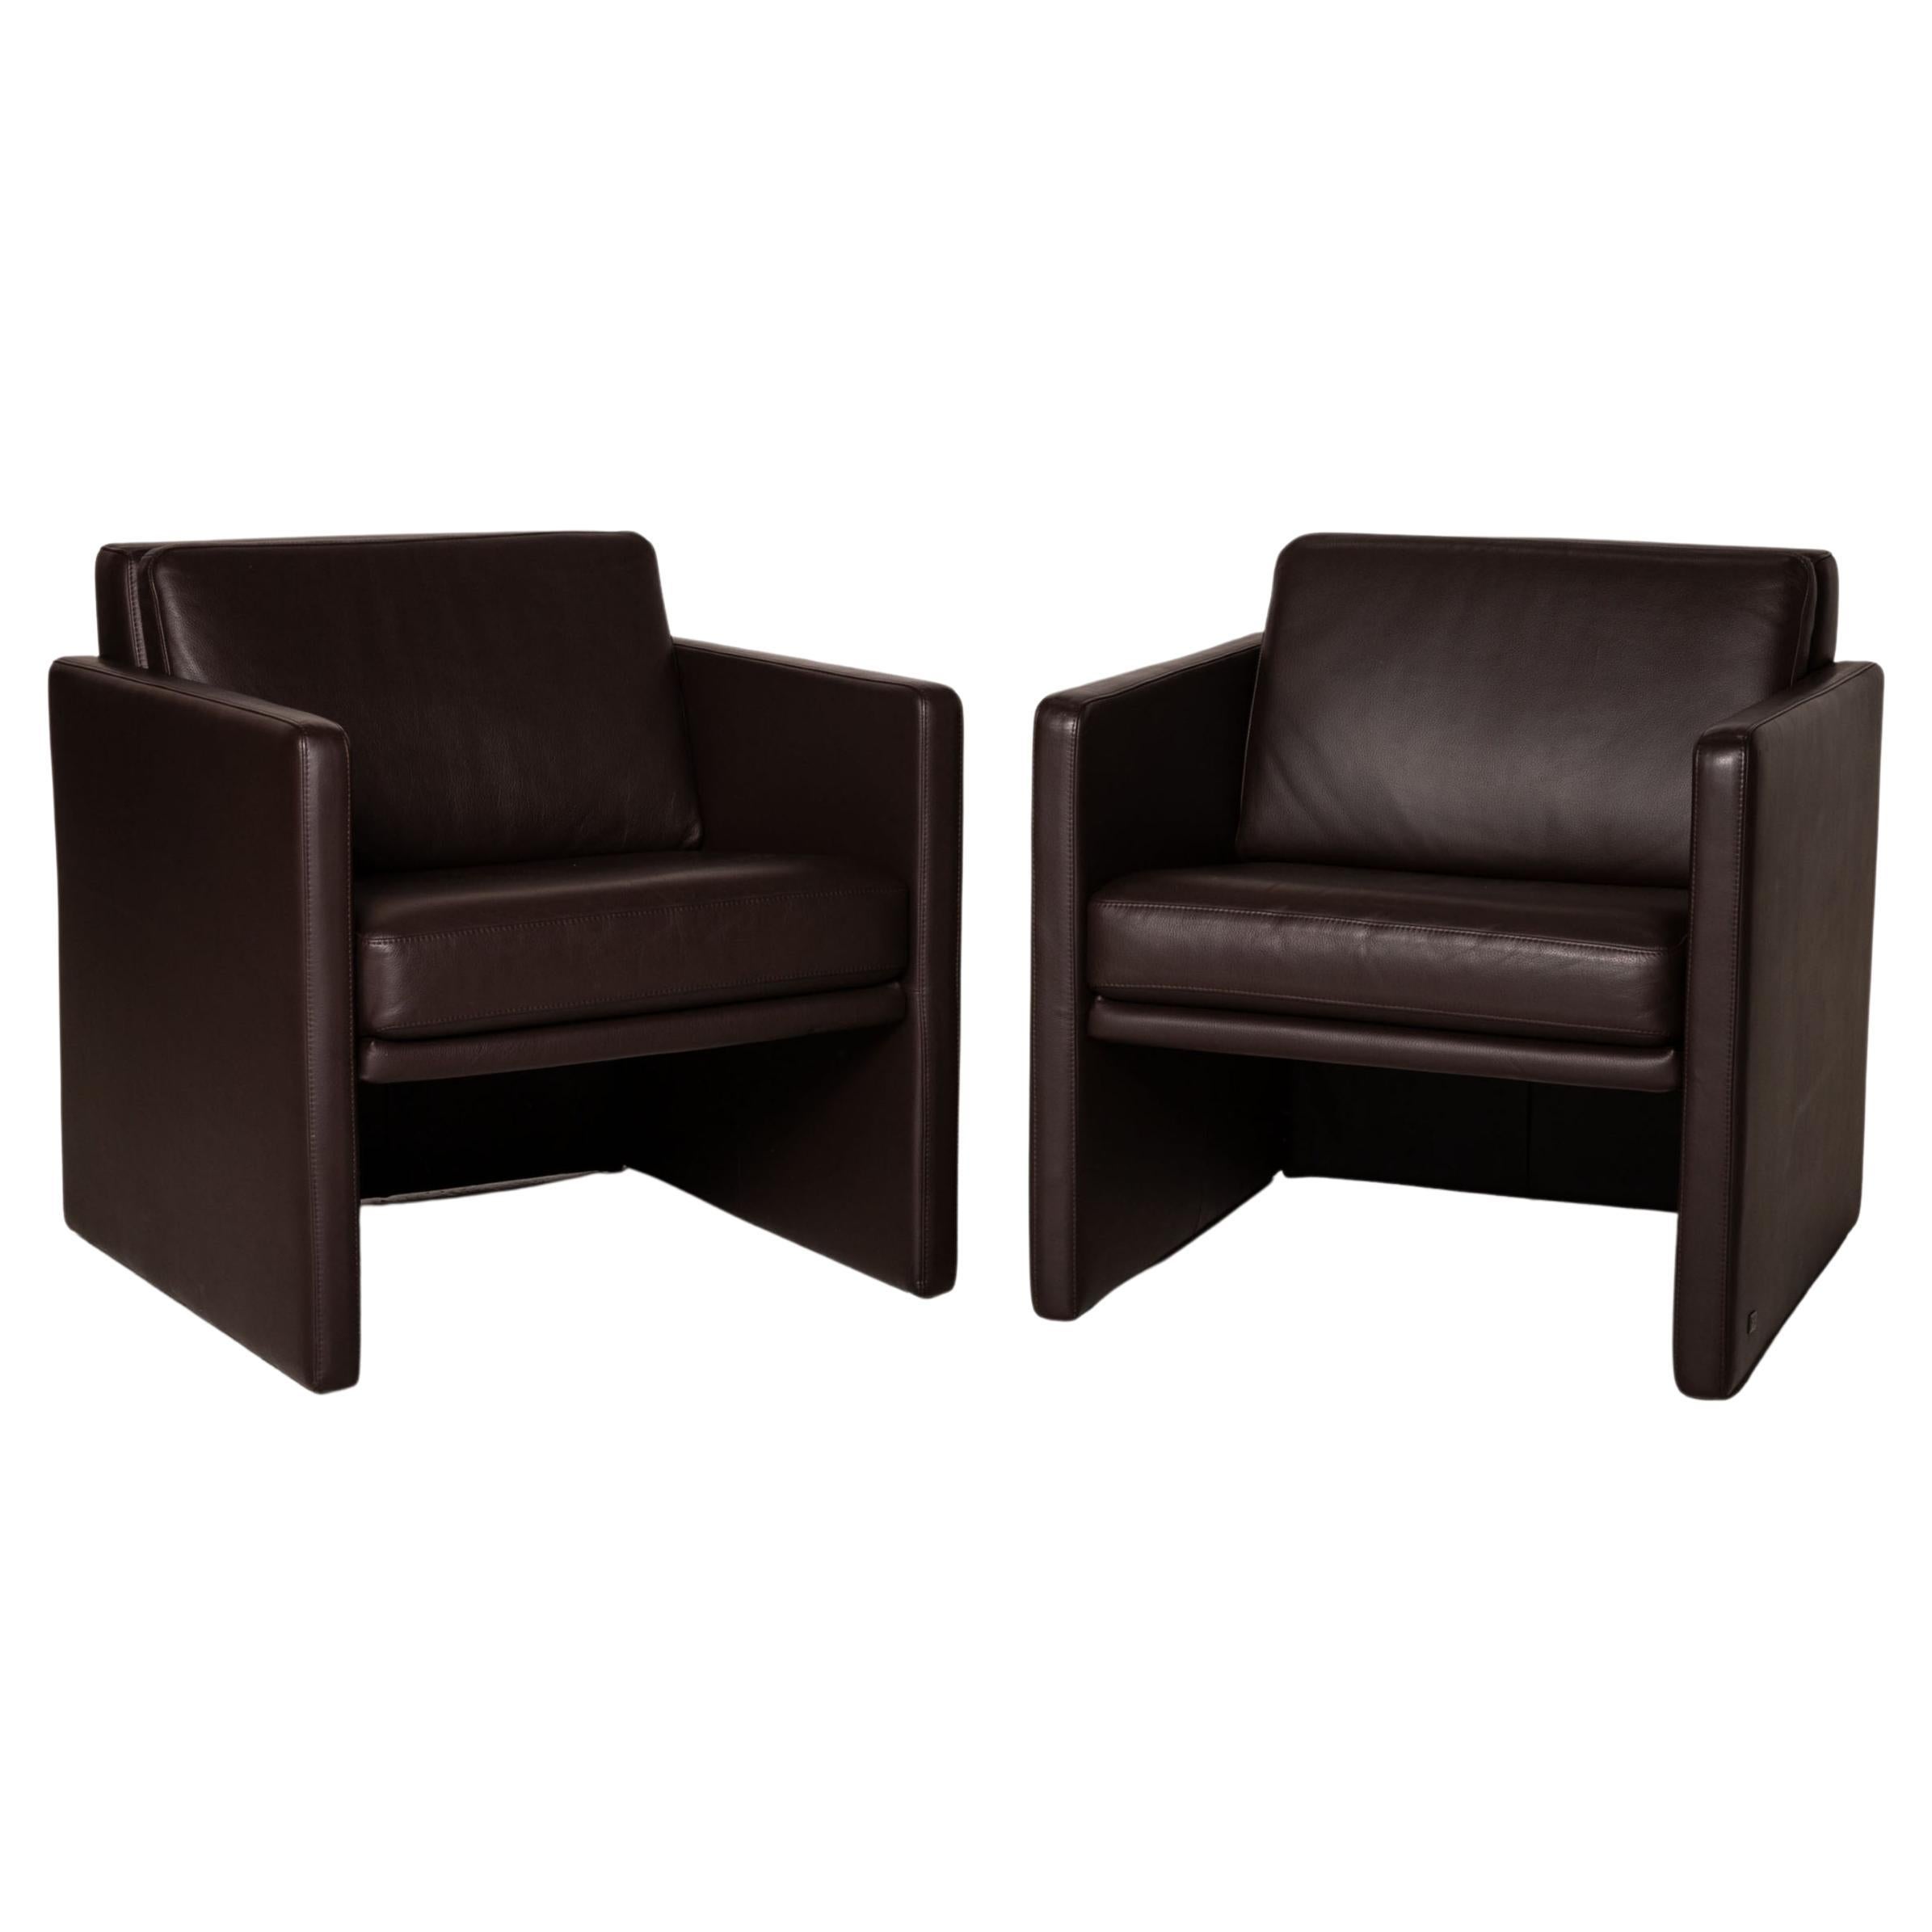 Rolf Benz Ego Leather Armchair Set Dark Brown 2x Armchairs For Sale